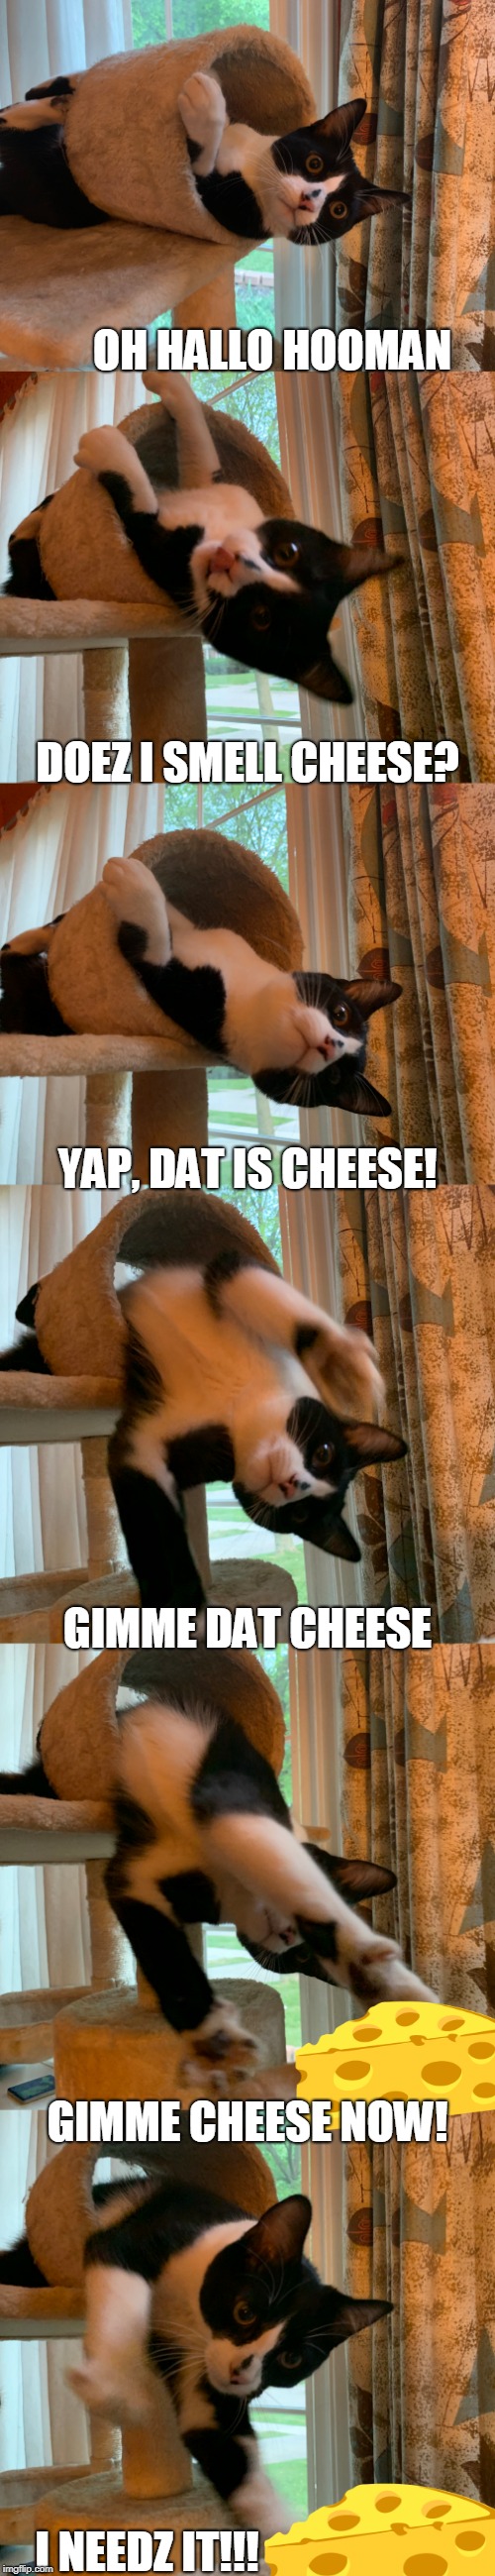 It's my cheese and I want it now! | OH HALLO HOOMAN; DOEZ I SMELL CHEESE? YAP, DAT IS CHEESE! GIMME DAT CHEESE; GIMME CHEESE NOW! I NEEDZ IT!!! | image tagged in cats,cheese,that's just silly cat,tuxedo,i can has cheezburger cat,cats are awesome | made w/ Imgflip meme maker